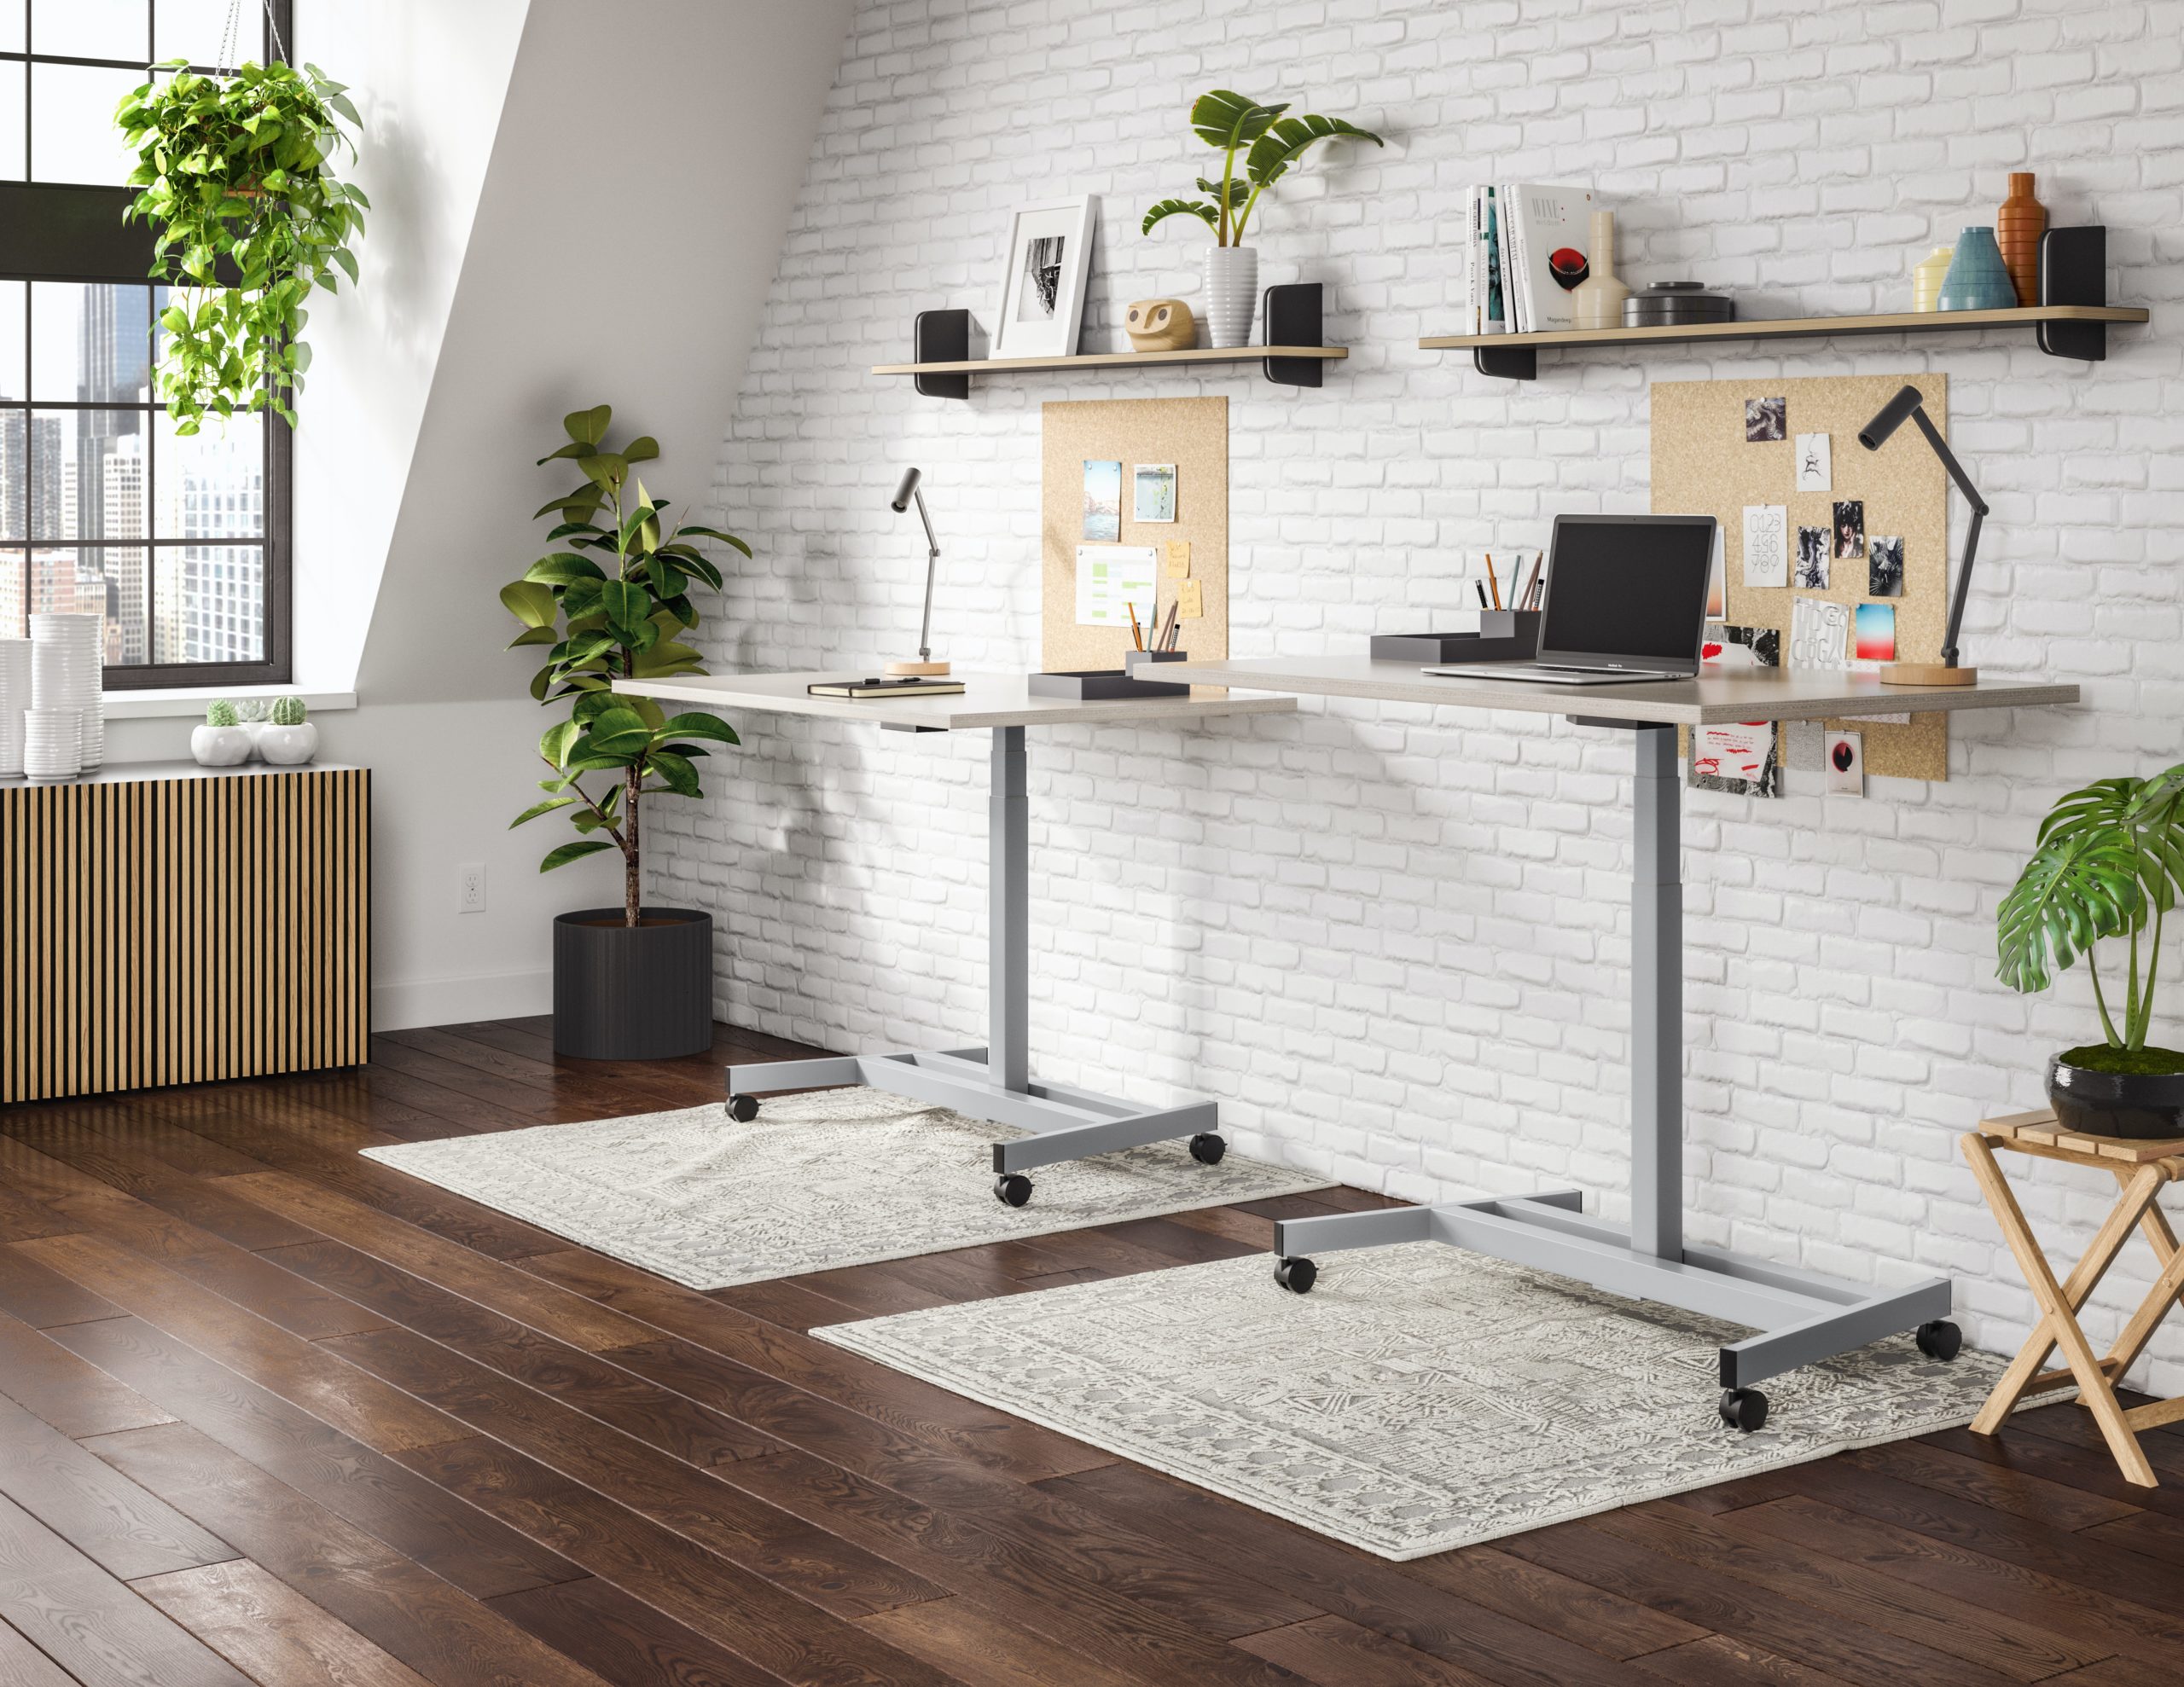 3 Office Accessories You Didn’t Know Your Home Office Needed